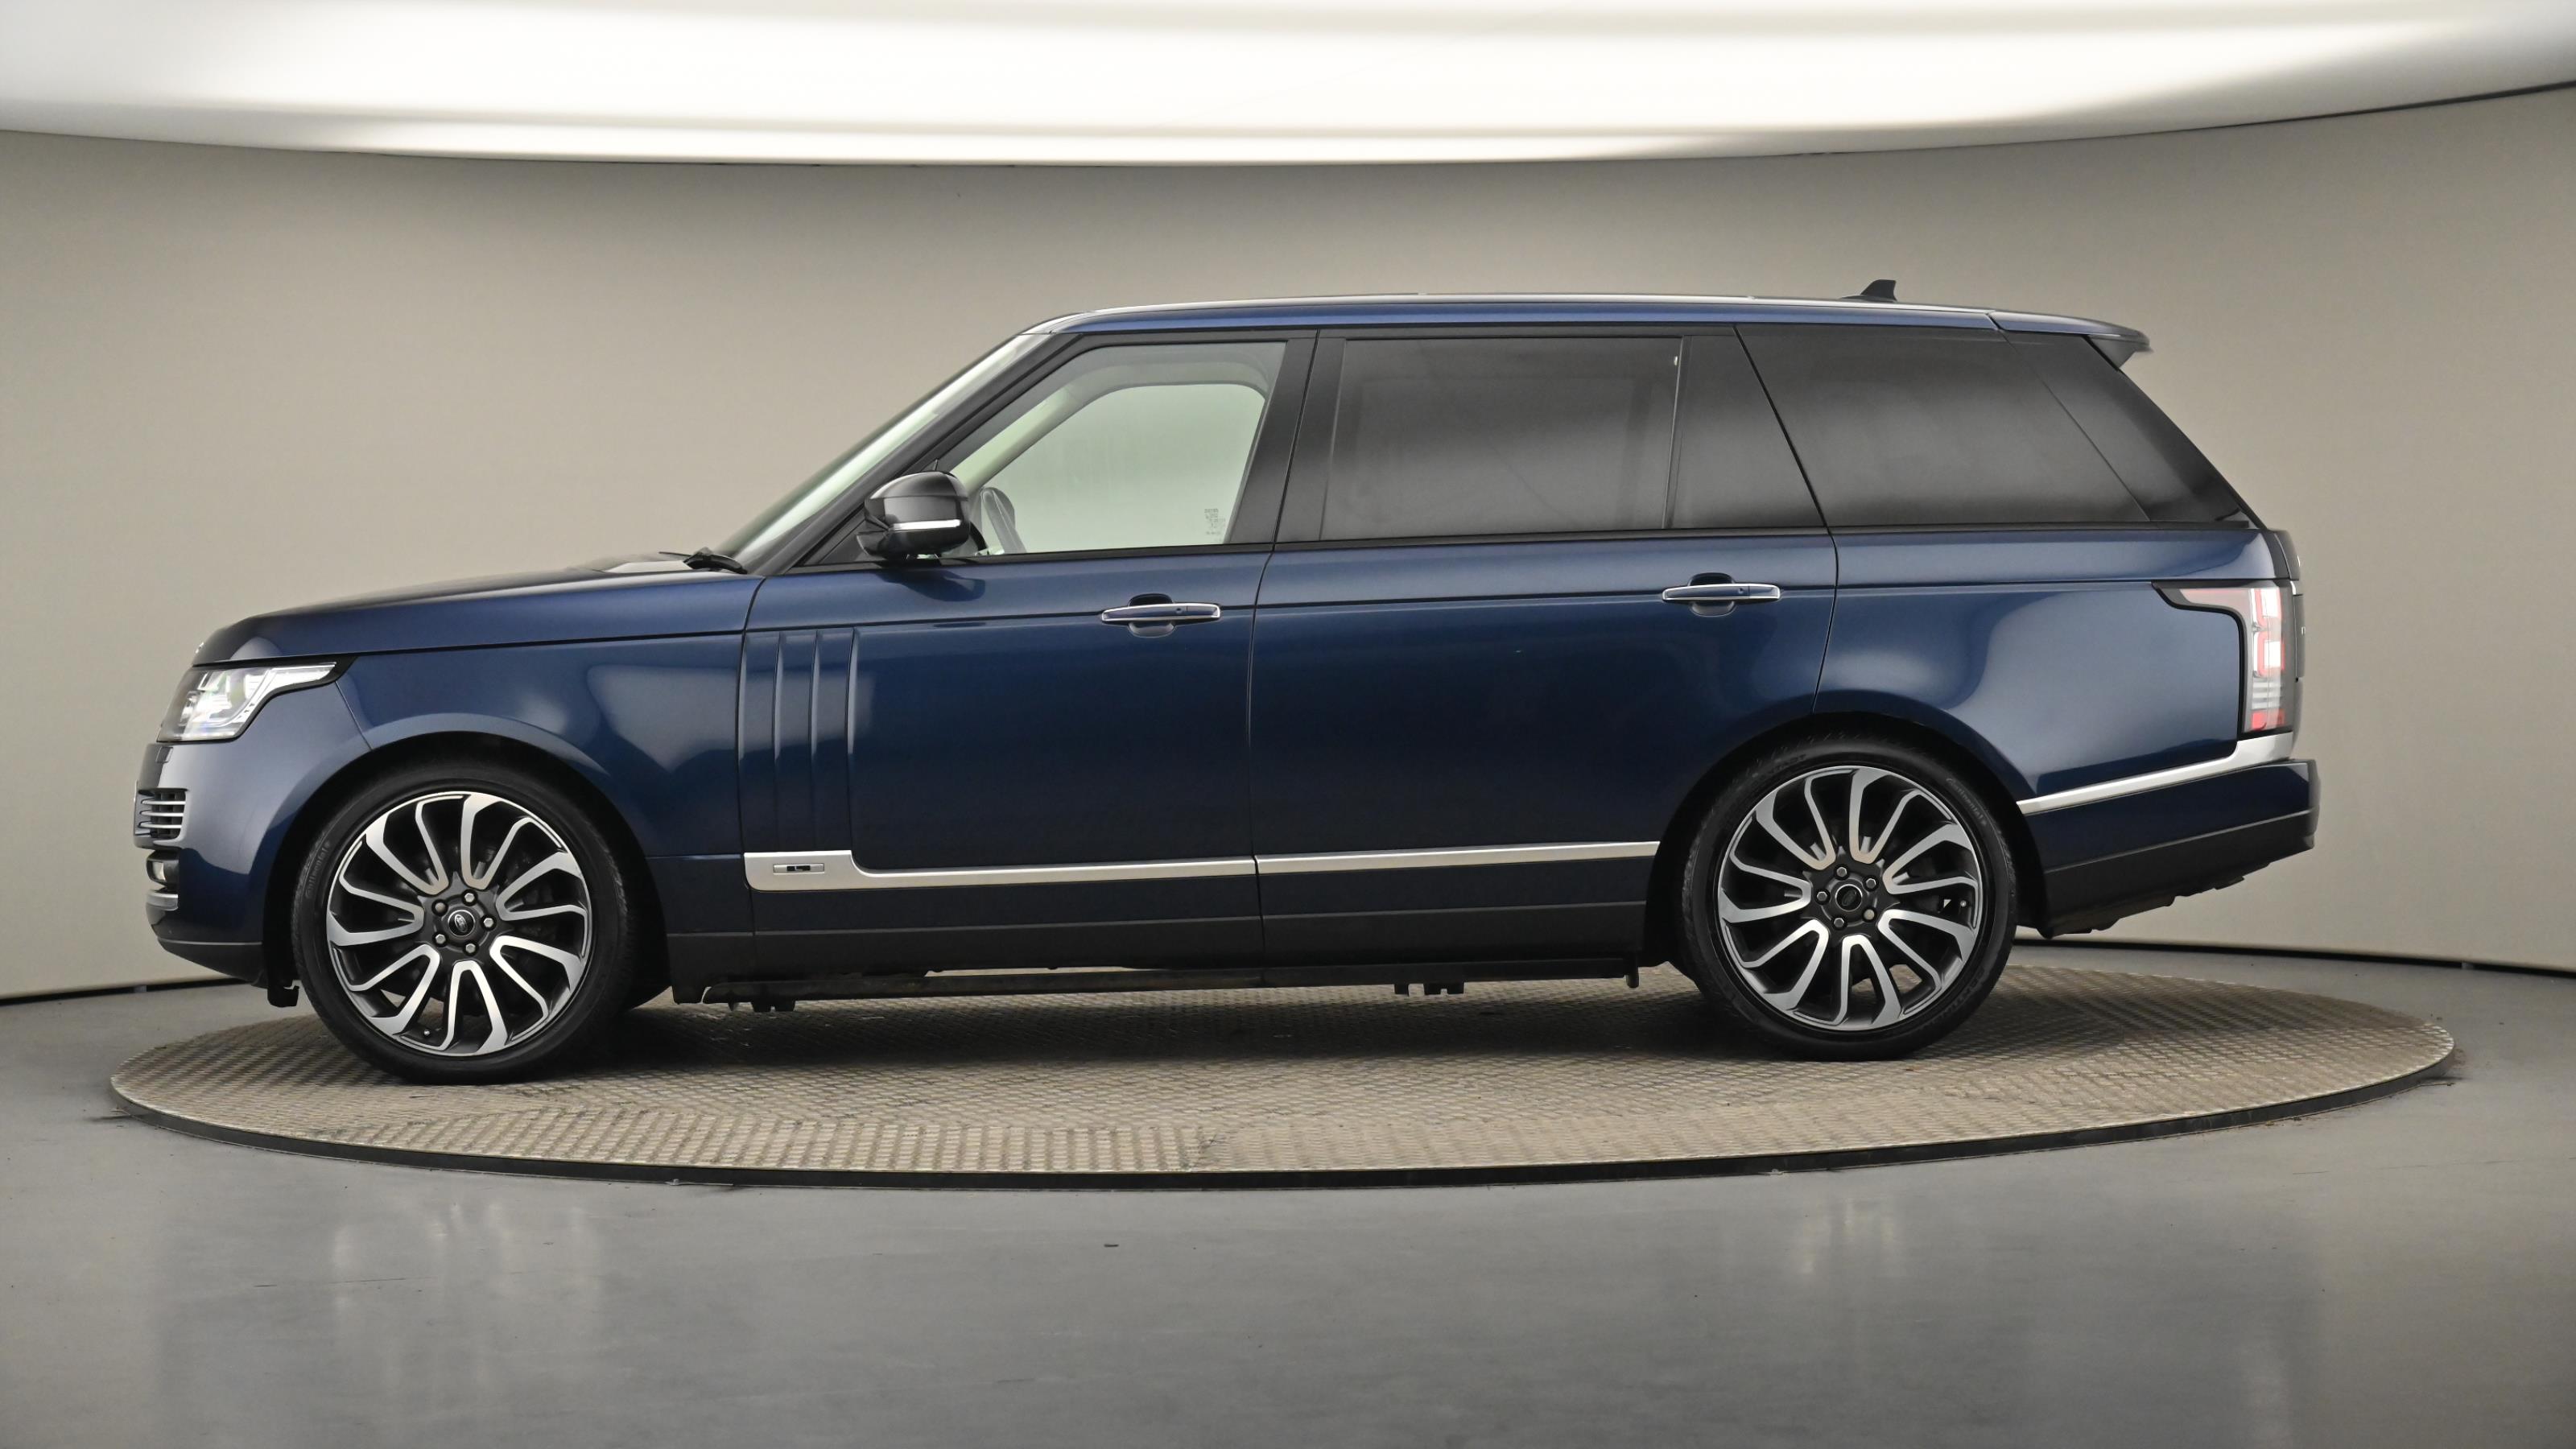 Used 2016 Land Rover Range Rover 4.4 SD V8 Autobiography